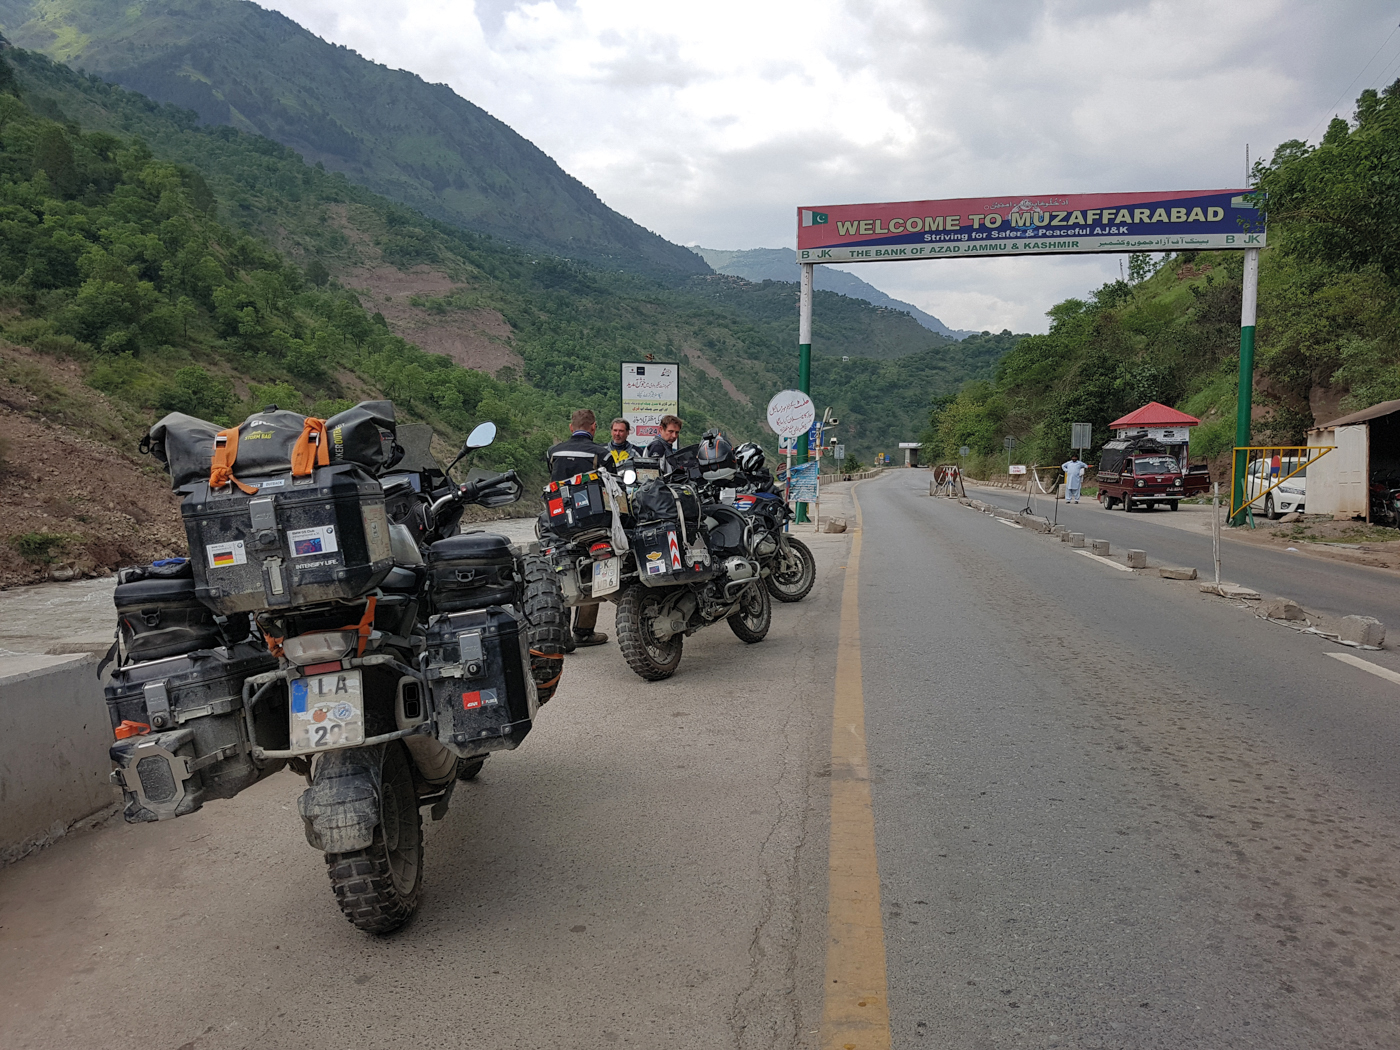 RIDE+OUT%21%3A+MOTORCYCLE+ROAD+TRIPS+AND+ADVENTURES